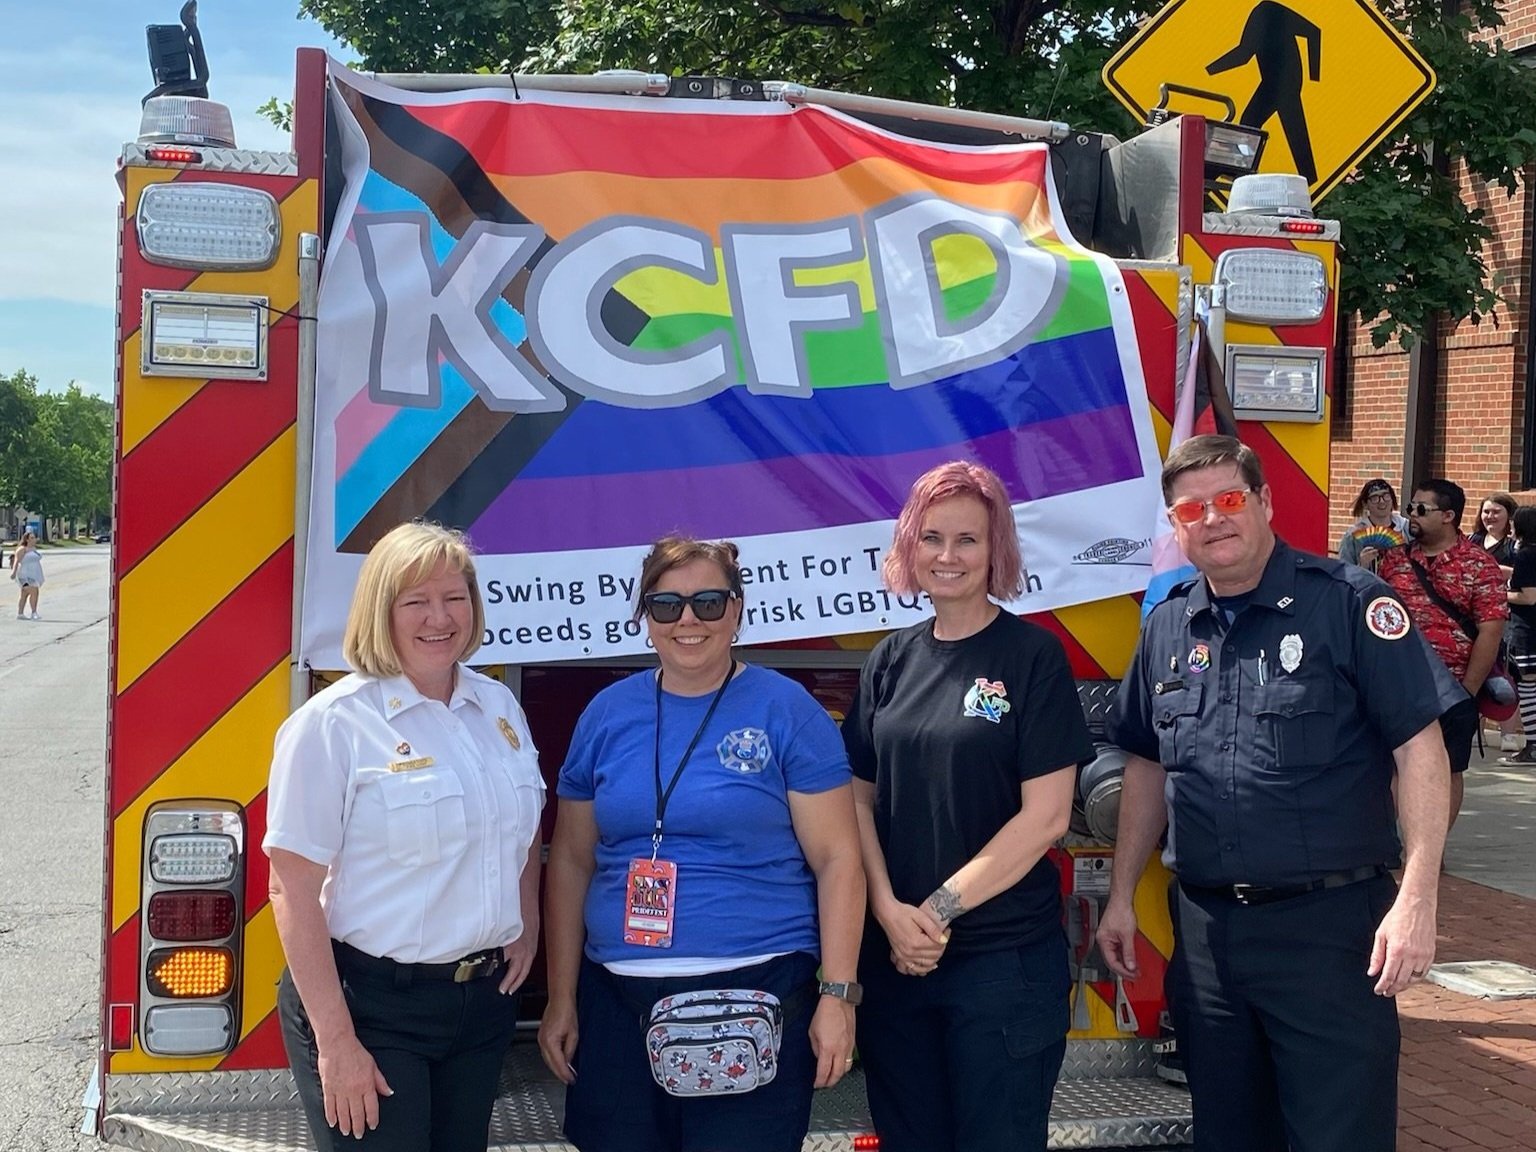 KCFD all decked out for the KC Pride Parade